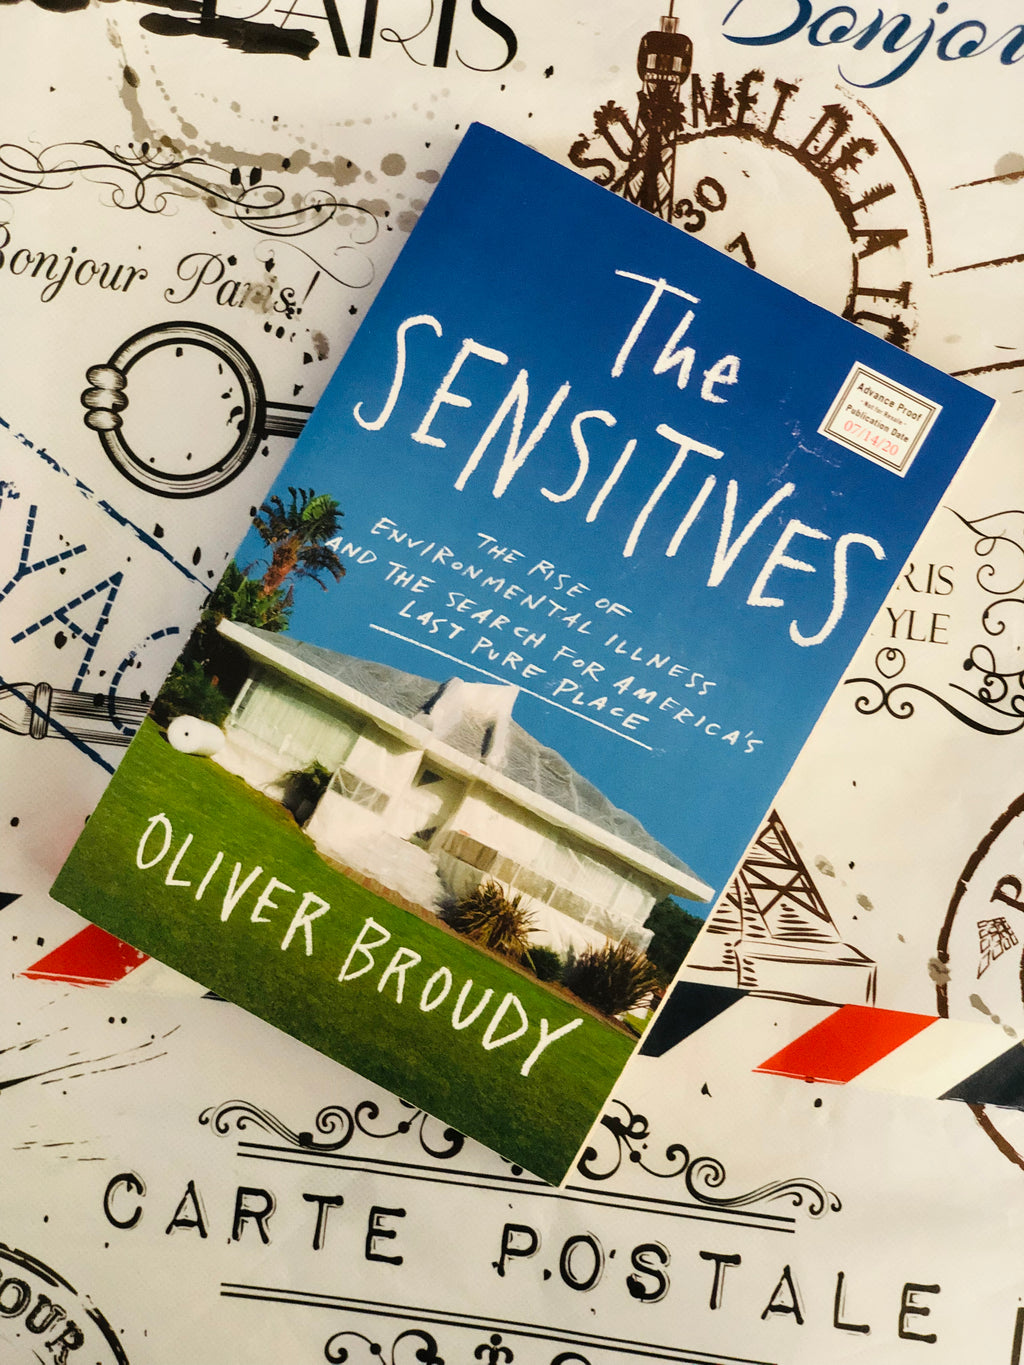 The Sensitives- By Oliver Broudy